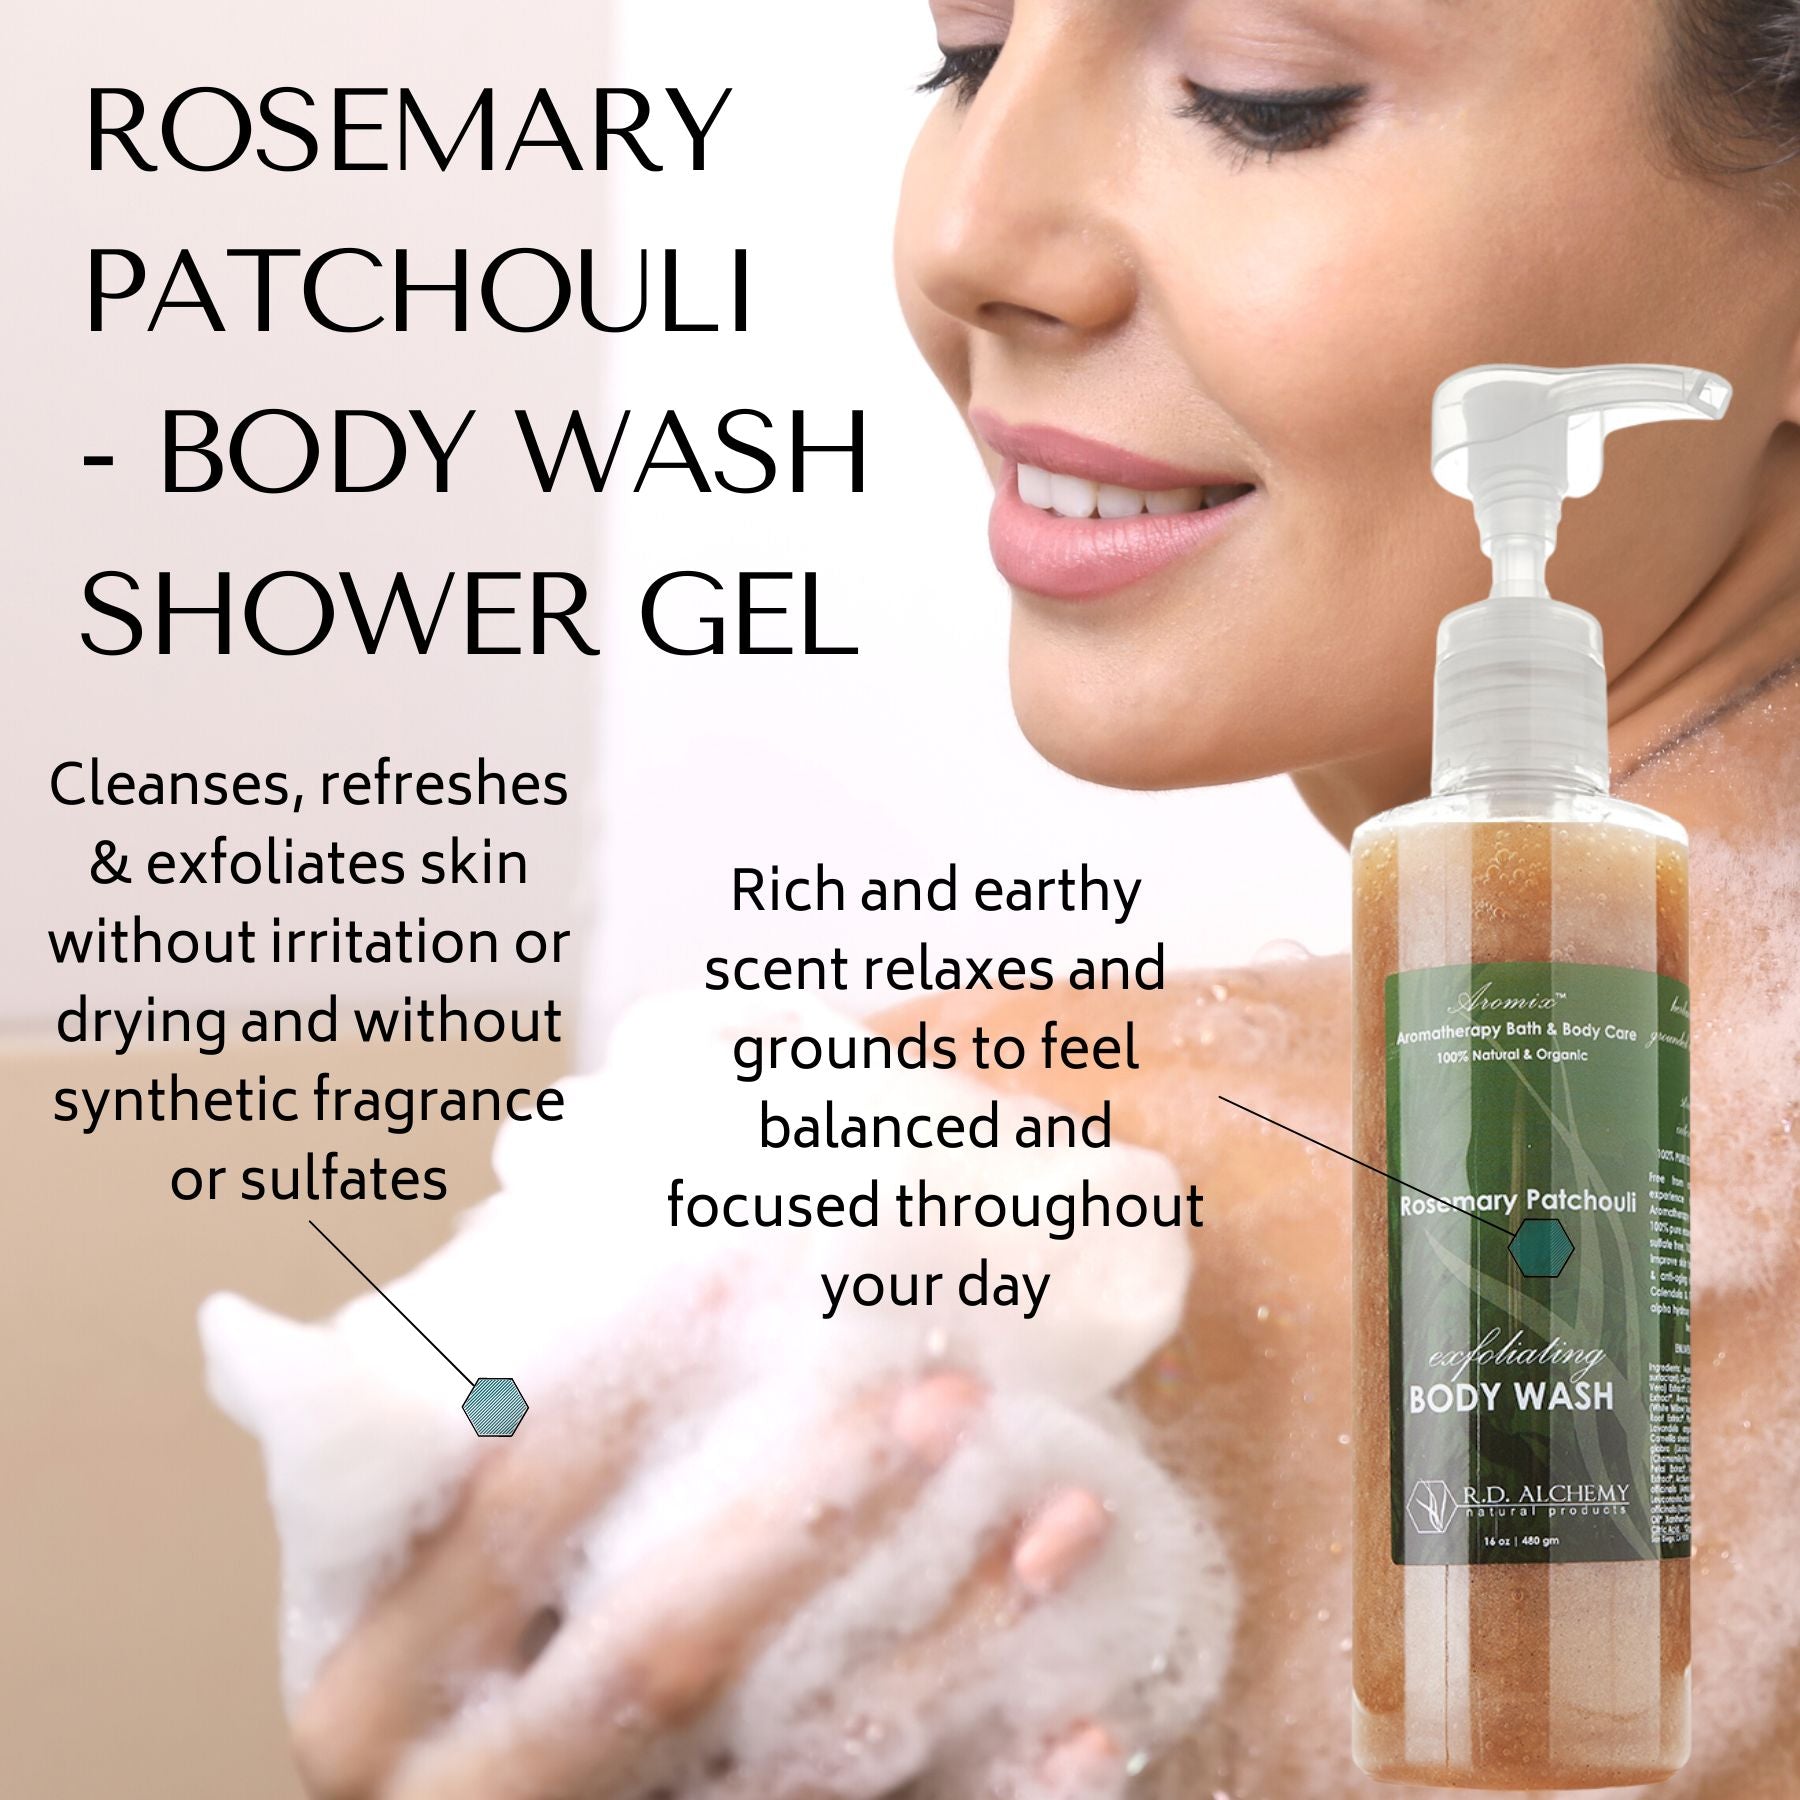 AROMATICA Embrace Body Wash Neroli & Patchouli for Aromatic Shower |  Relaxing Your Body & Mind with Earthly and Floral Fragrances | Vegan,  Sulfate